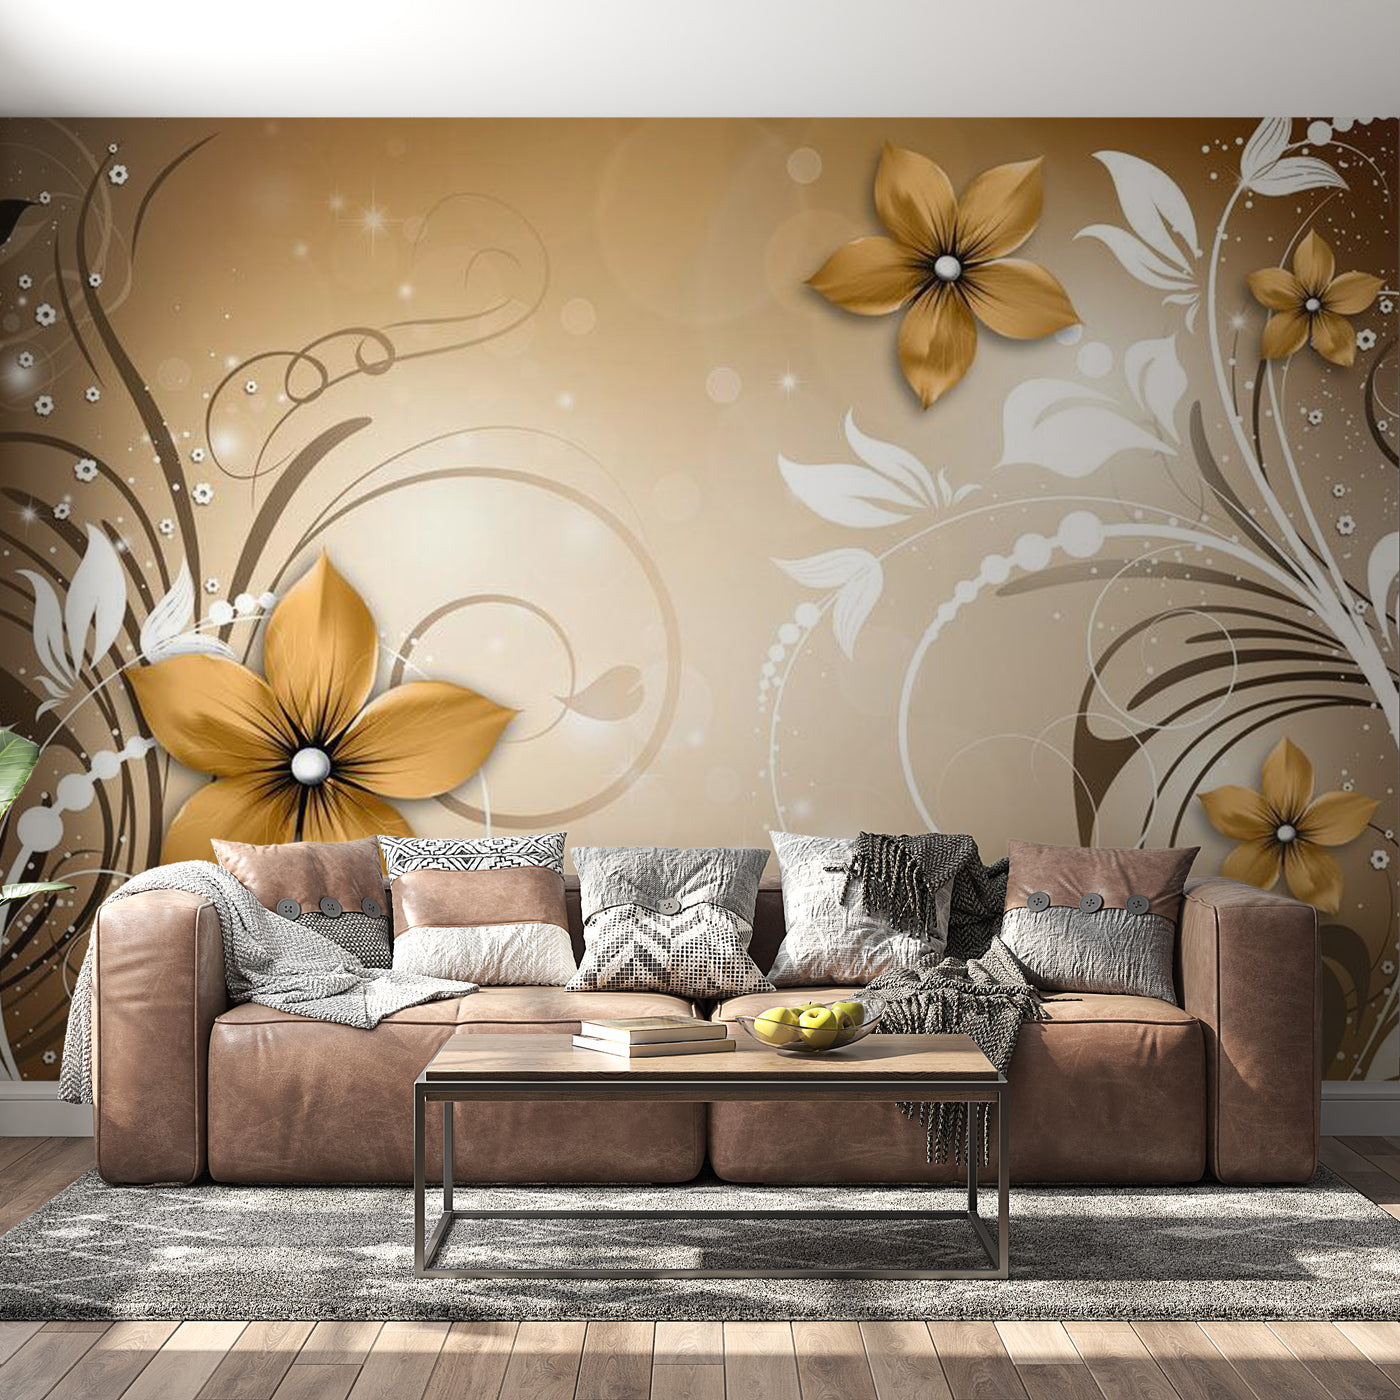 Peel & Stick Floral Wall Mural - Brown Rhapsody - Removable Wall Decals